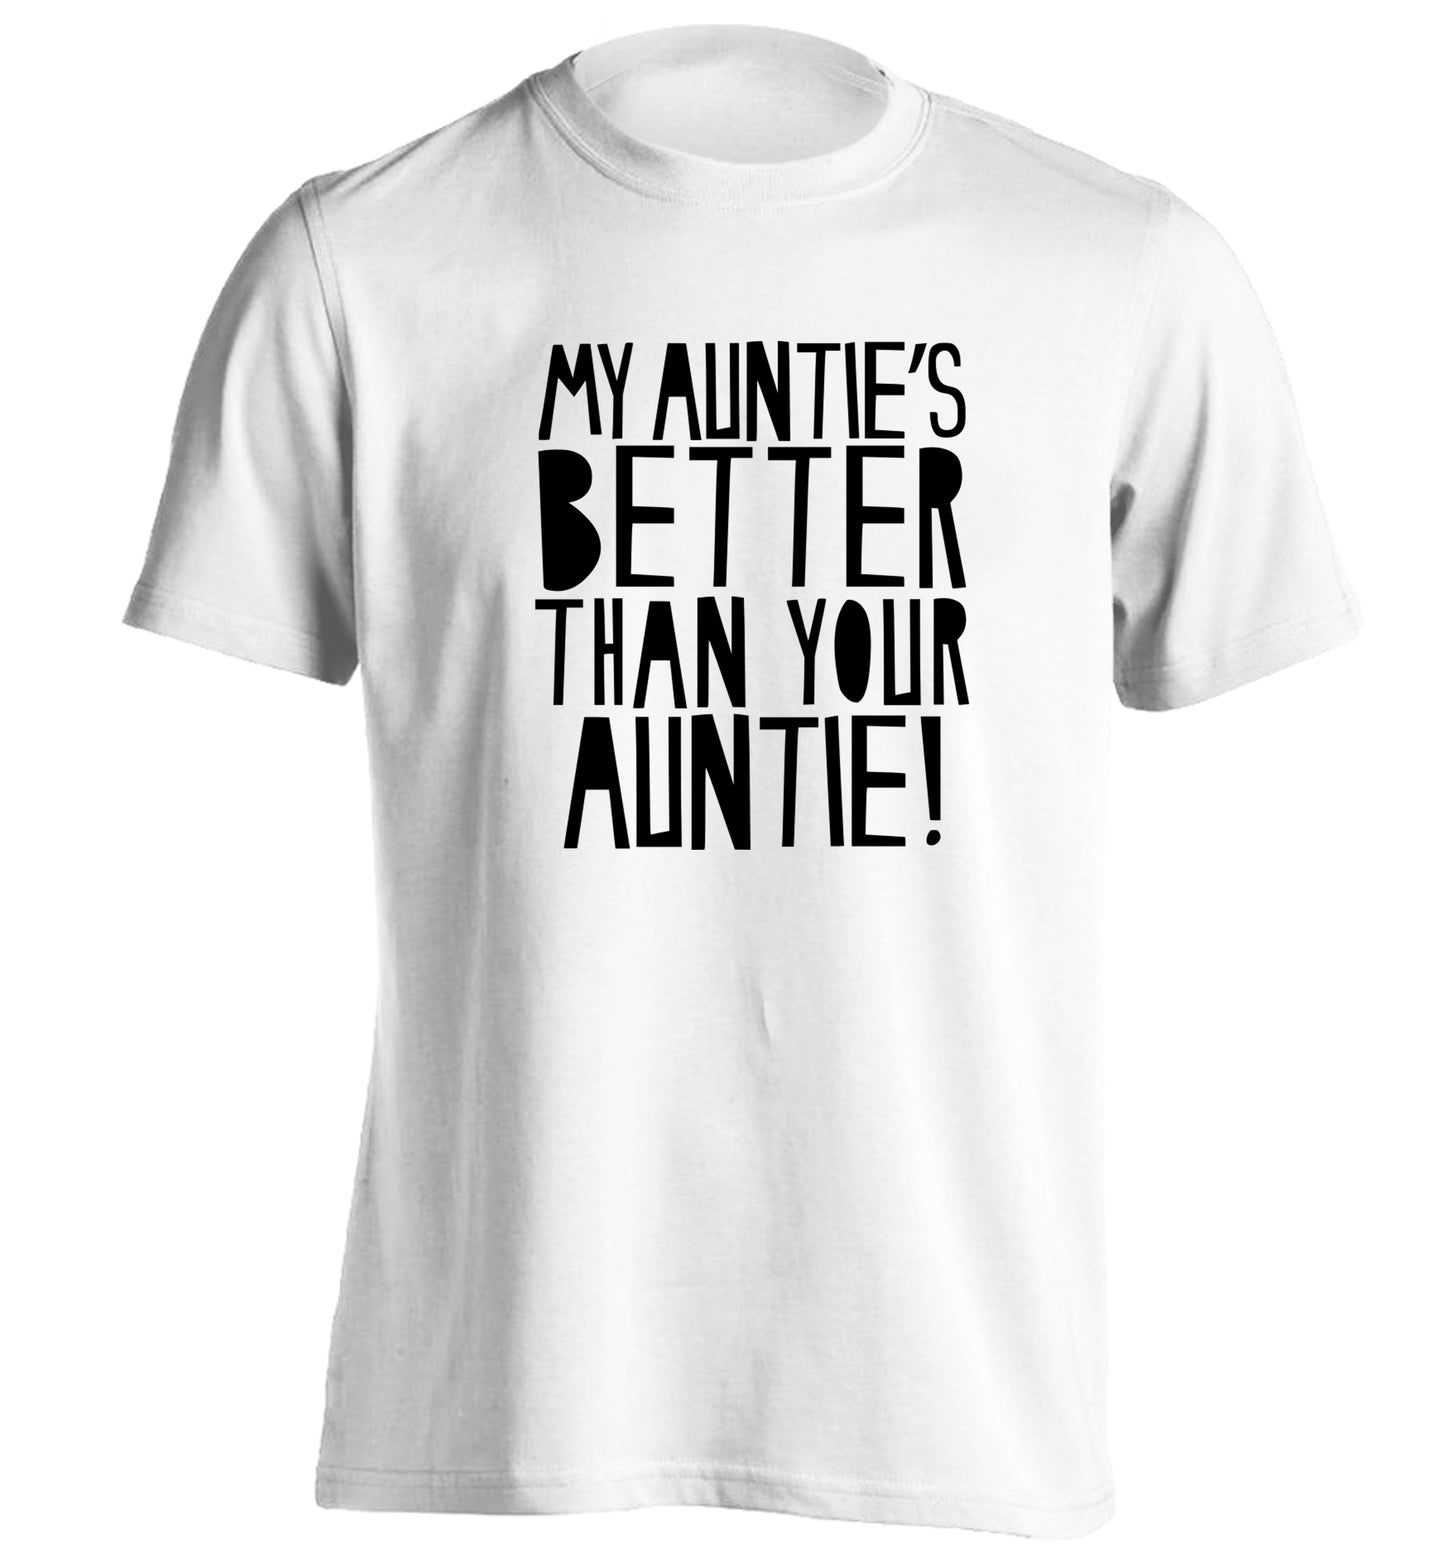 My auntie's better than your auntie adults unisex white Tshirt 2XL